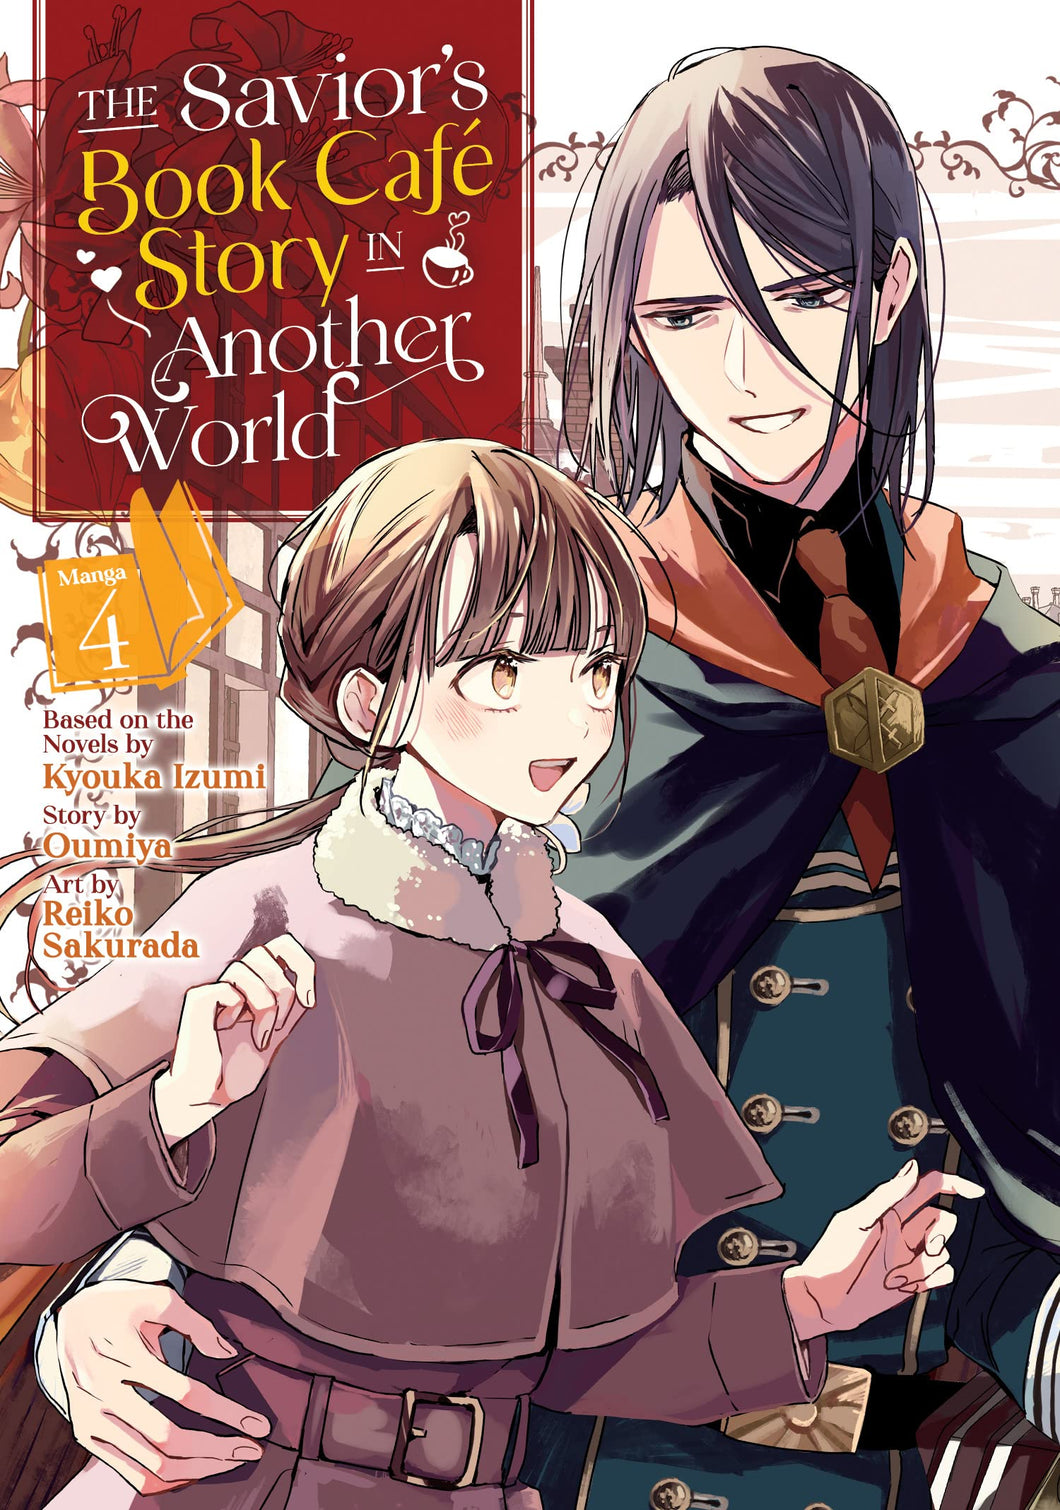 The Savior's Book Cafe Story In Another World Volume 4